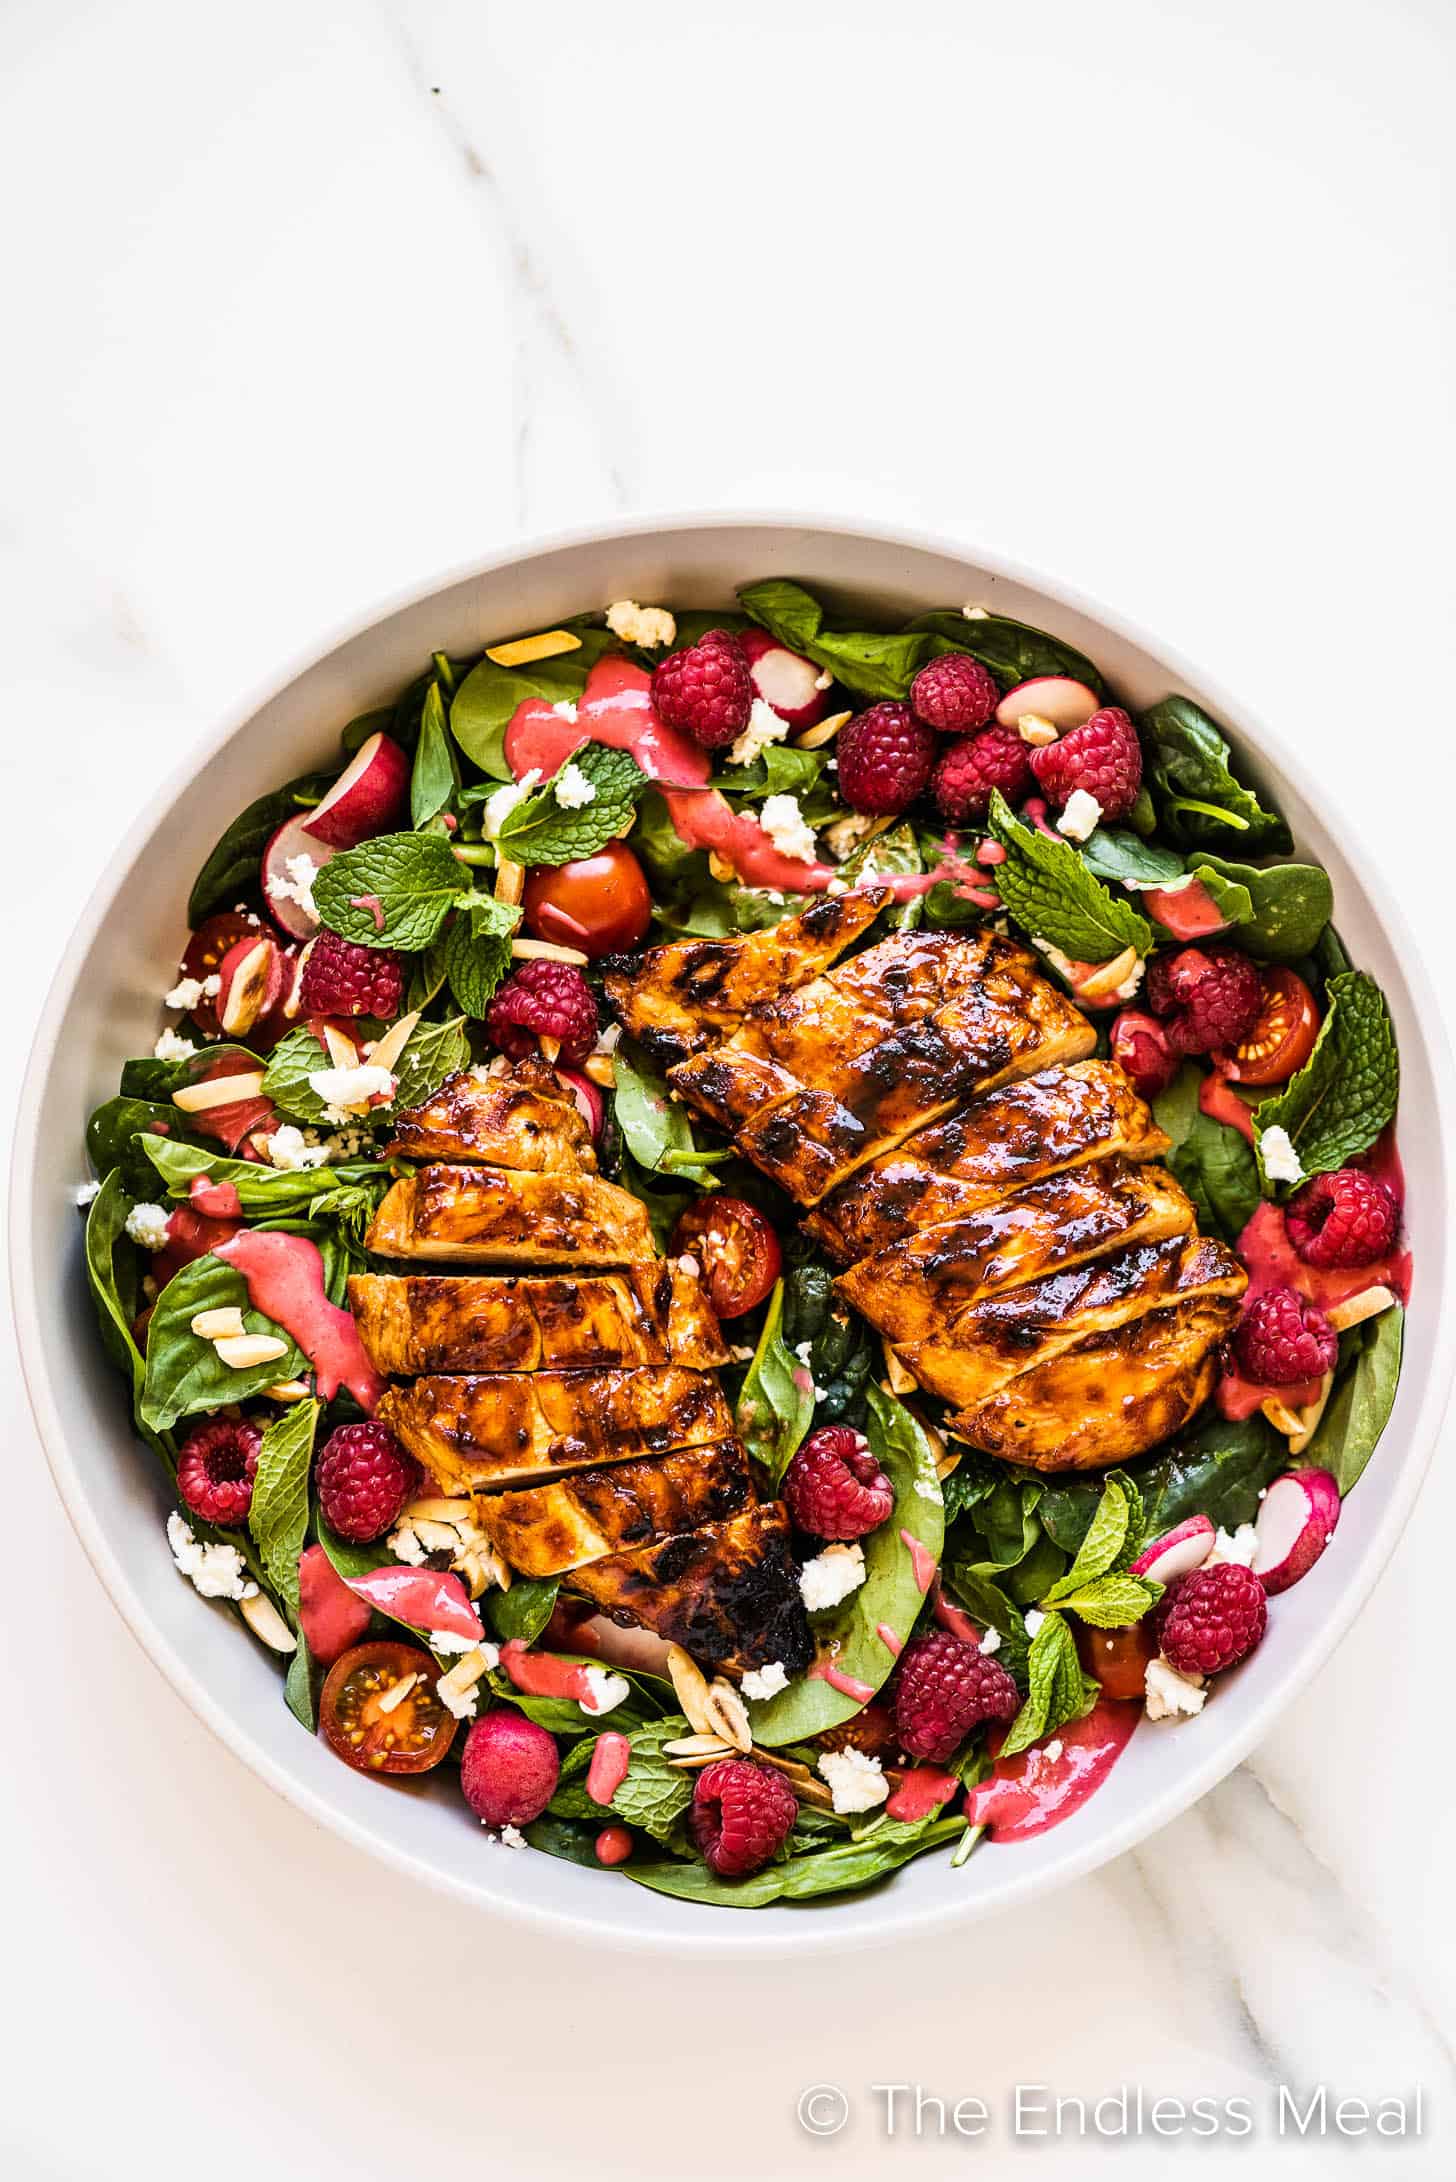 Summer Chicken Salad with spinach and raspberries